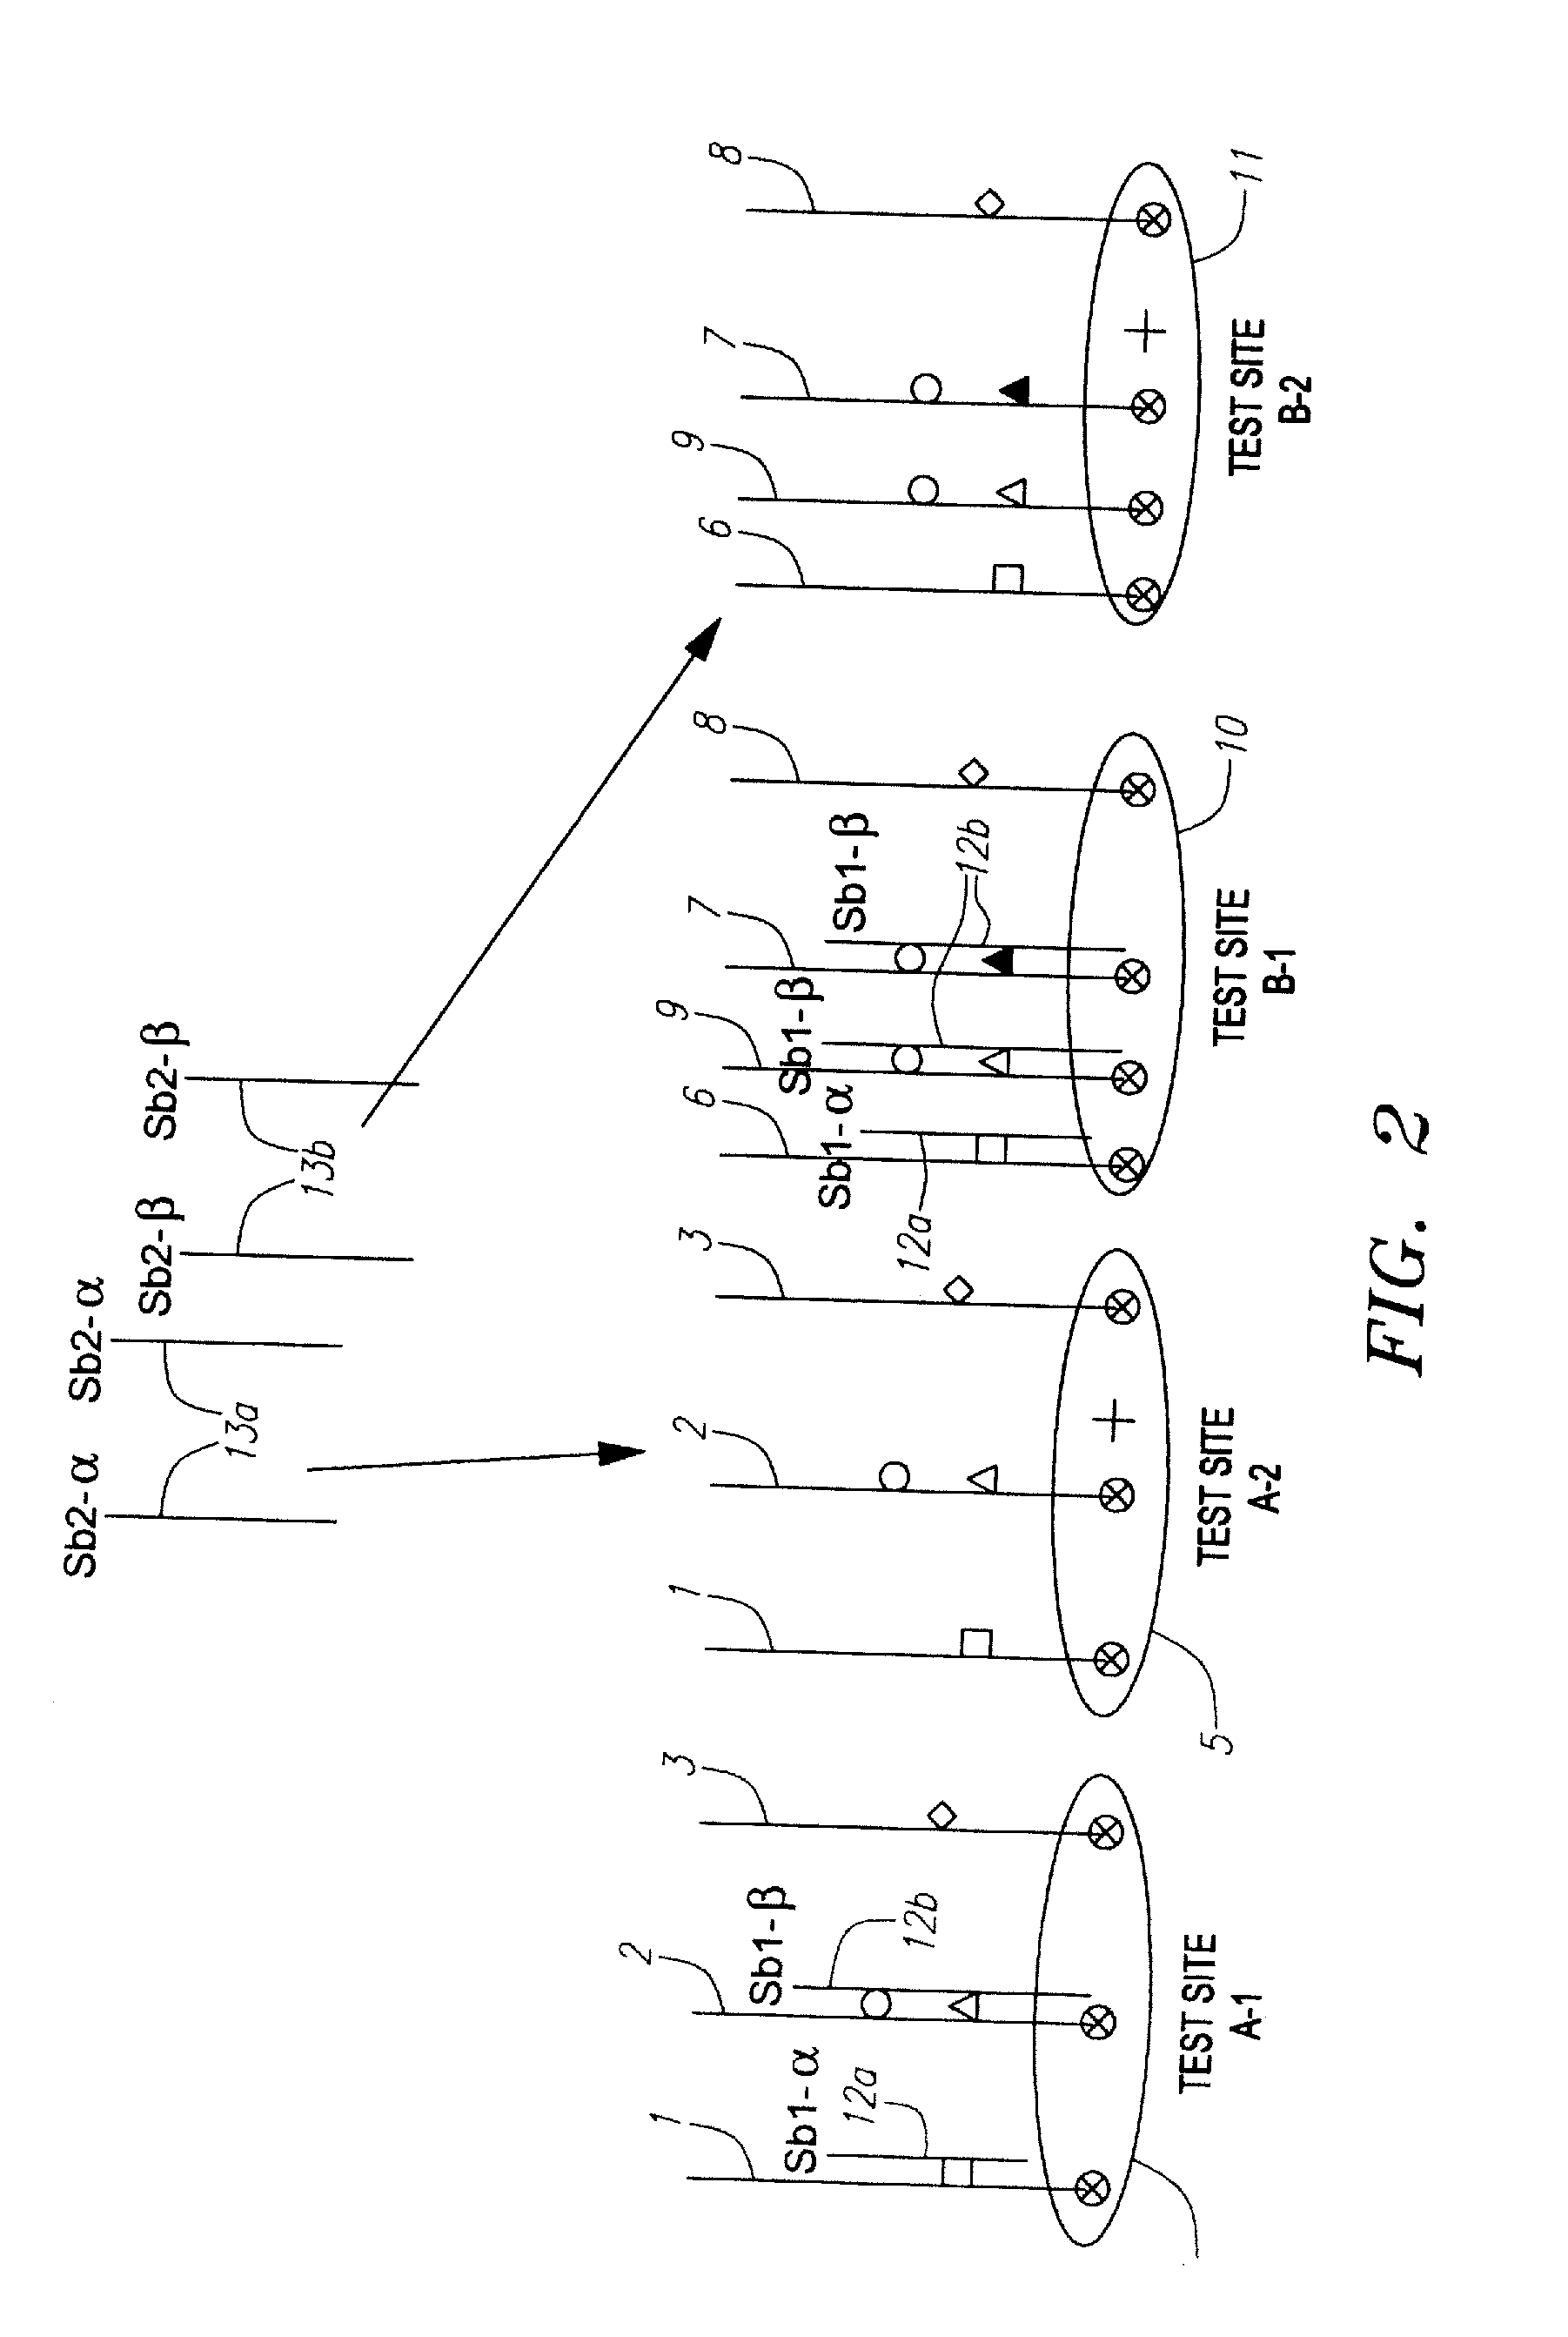 Methods and apparatus for screening and detecting multiple genetic mutations